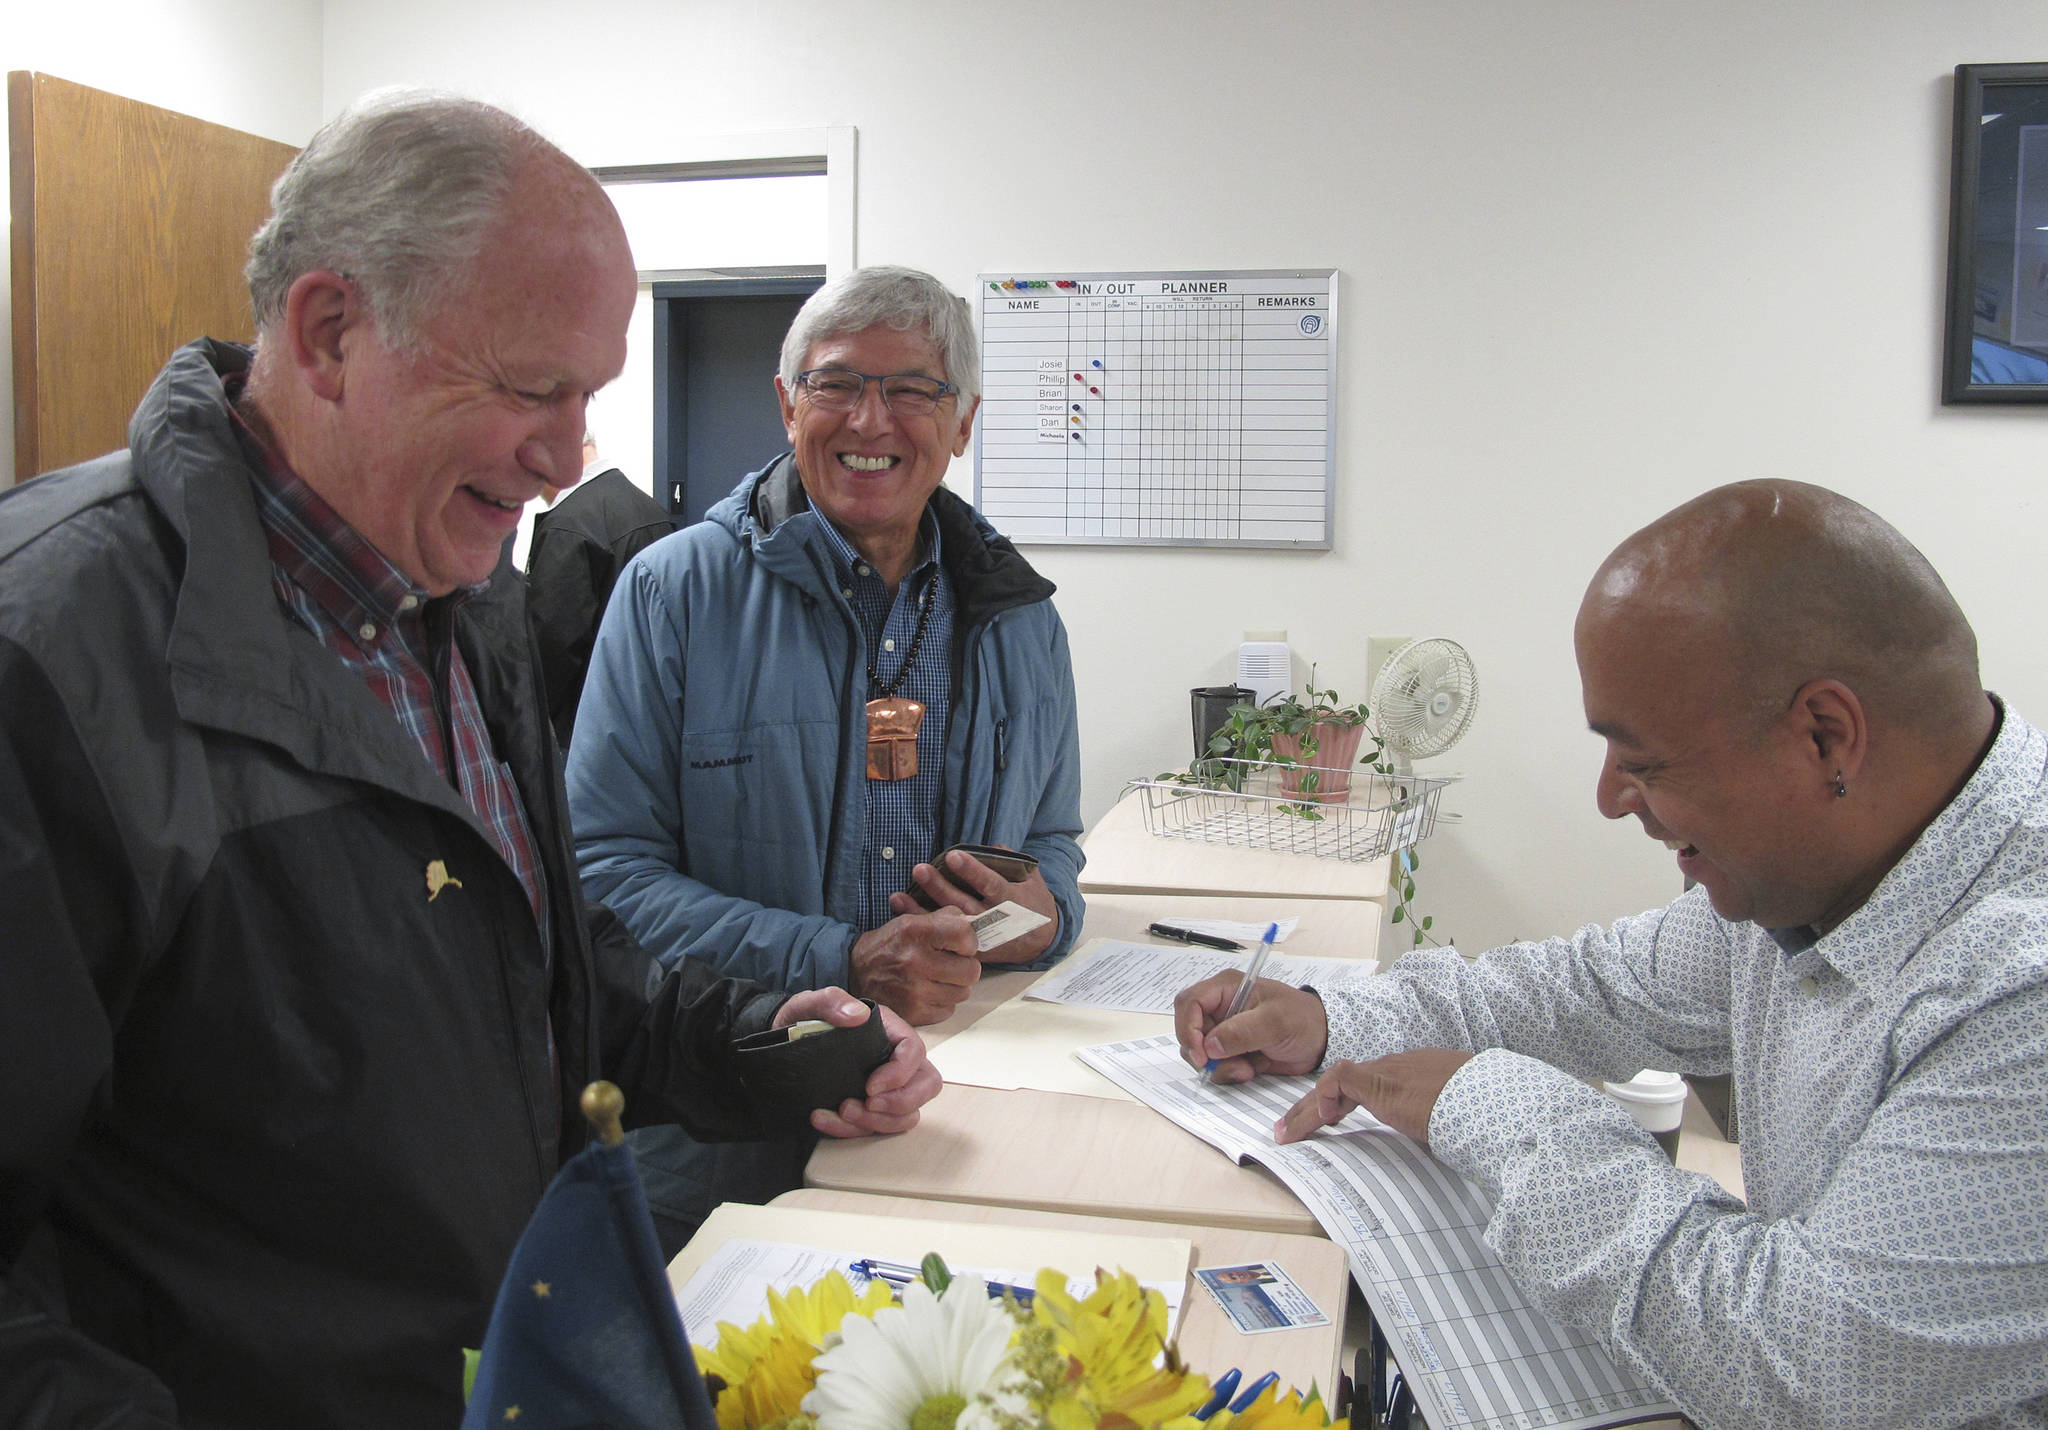 Gov. Bill Walker, left, and Lt. Gov. Byron Mallott, center, smile as they complete paperwork at the state Division of Elections on Monday in Juneau. Walker and Mallott announced plans to seek re-election on Monday. (AP Photo/Becky Bohrer)